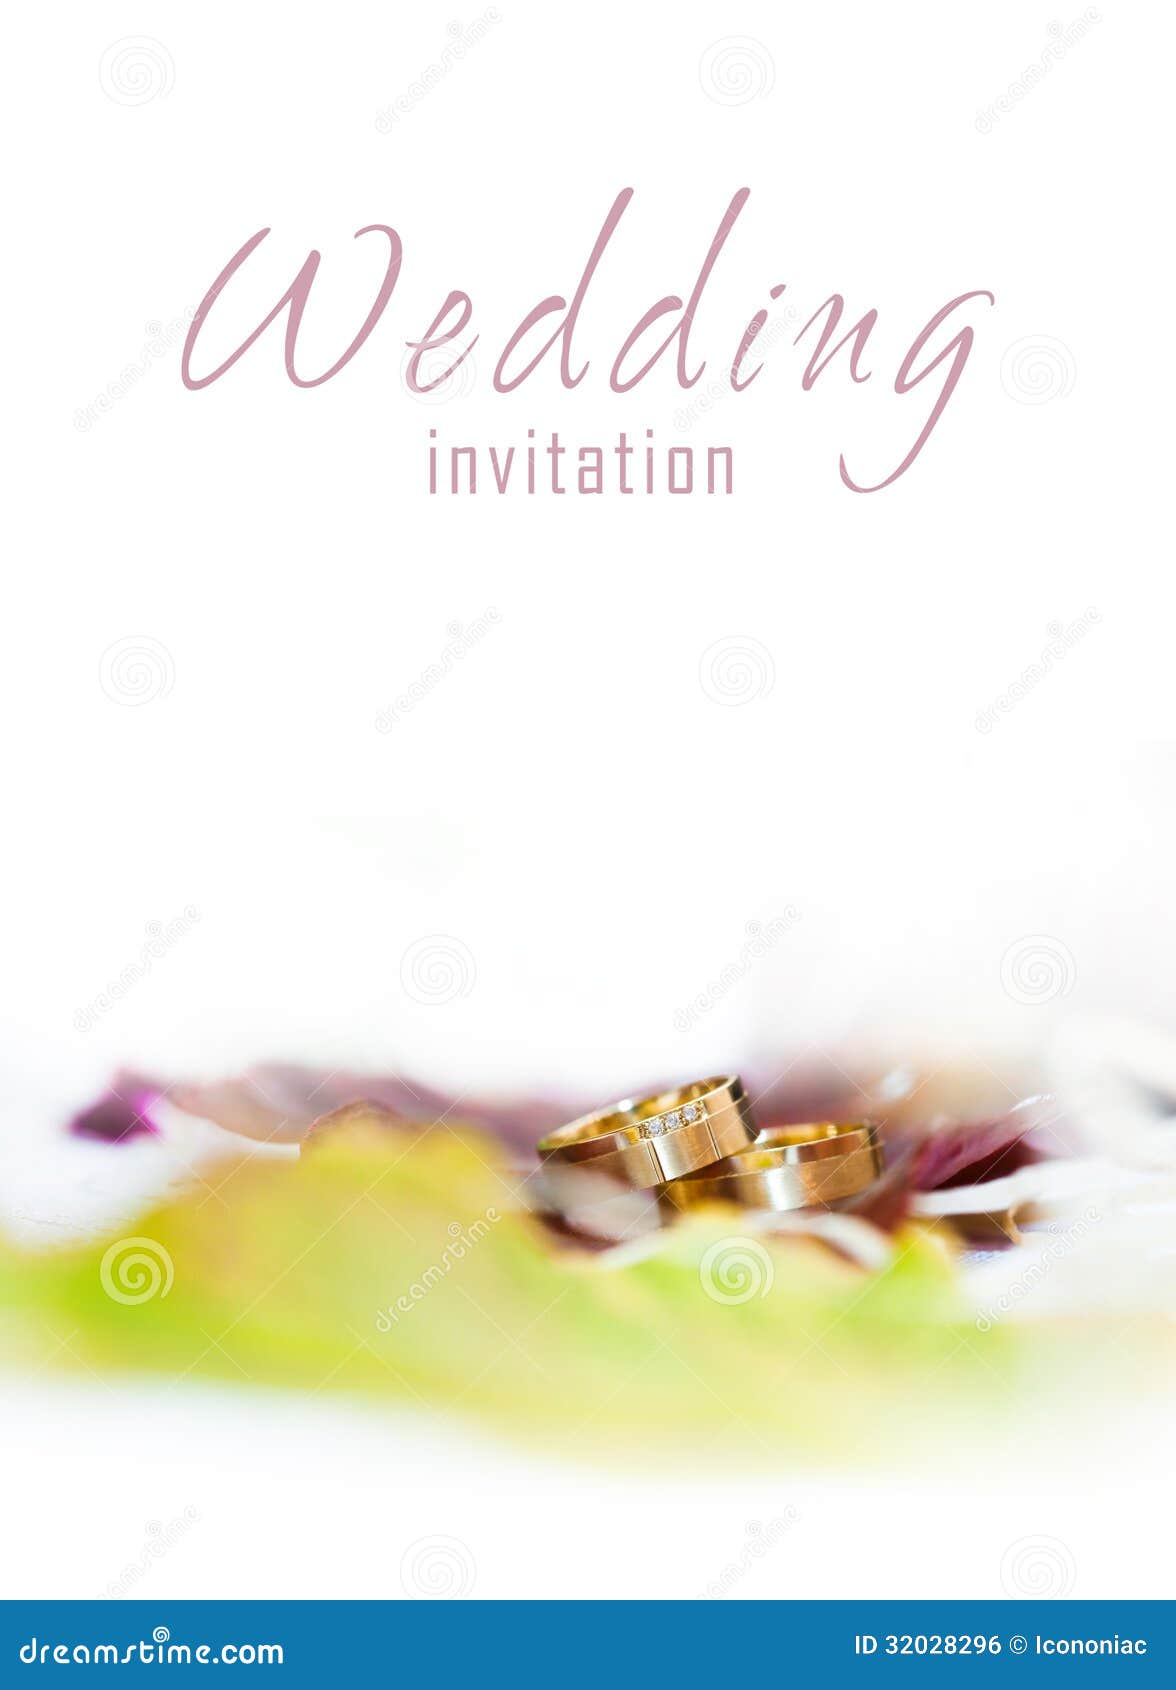 Ring Ceremony Invitation Card Indian | Engagement Invite for whatsapp